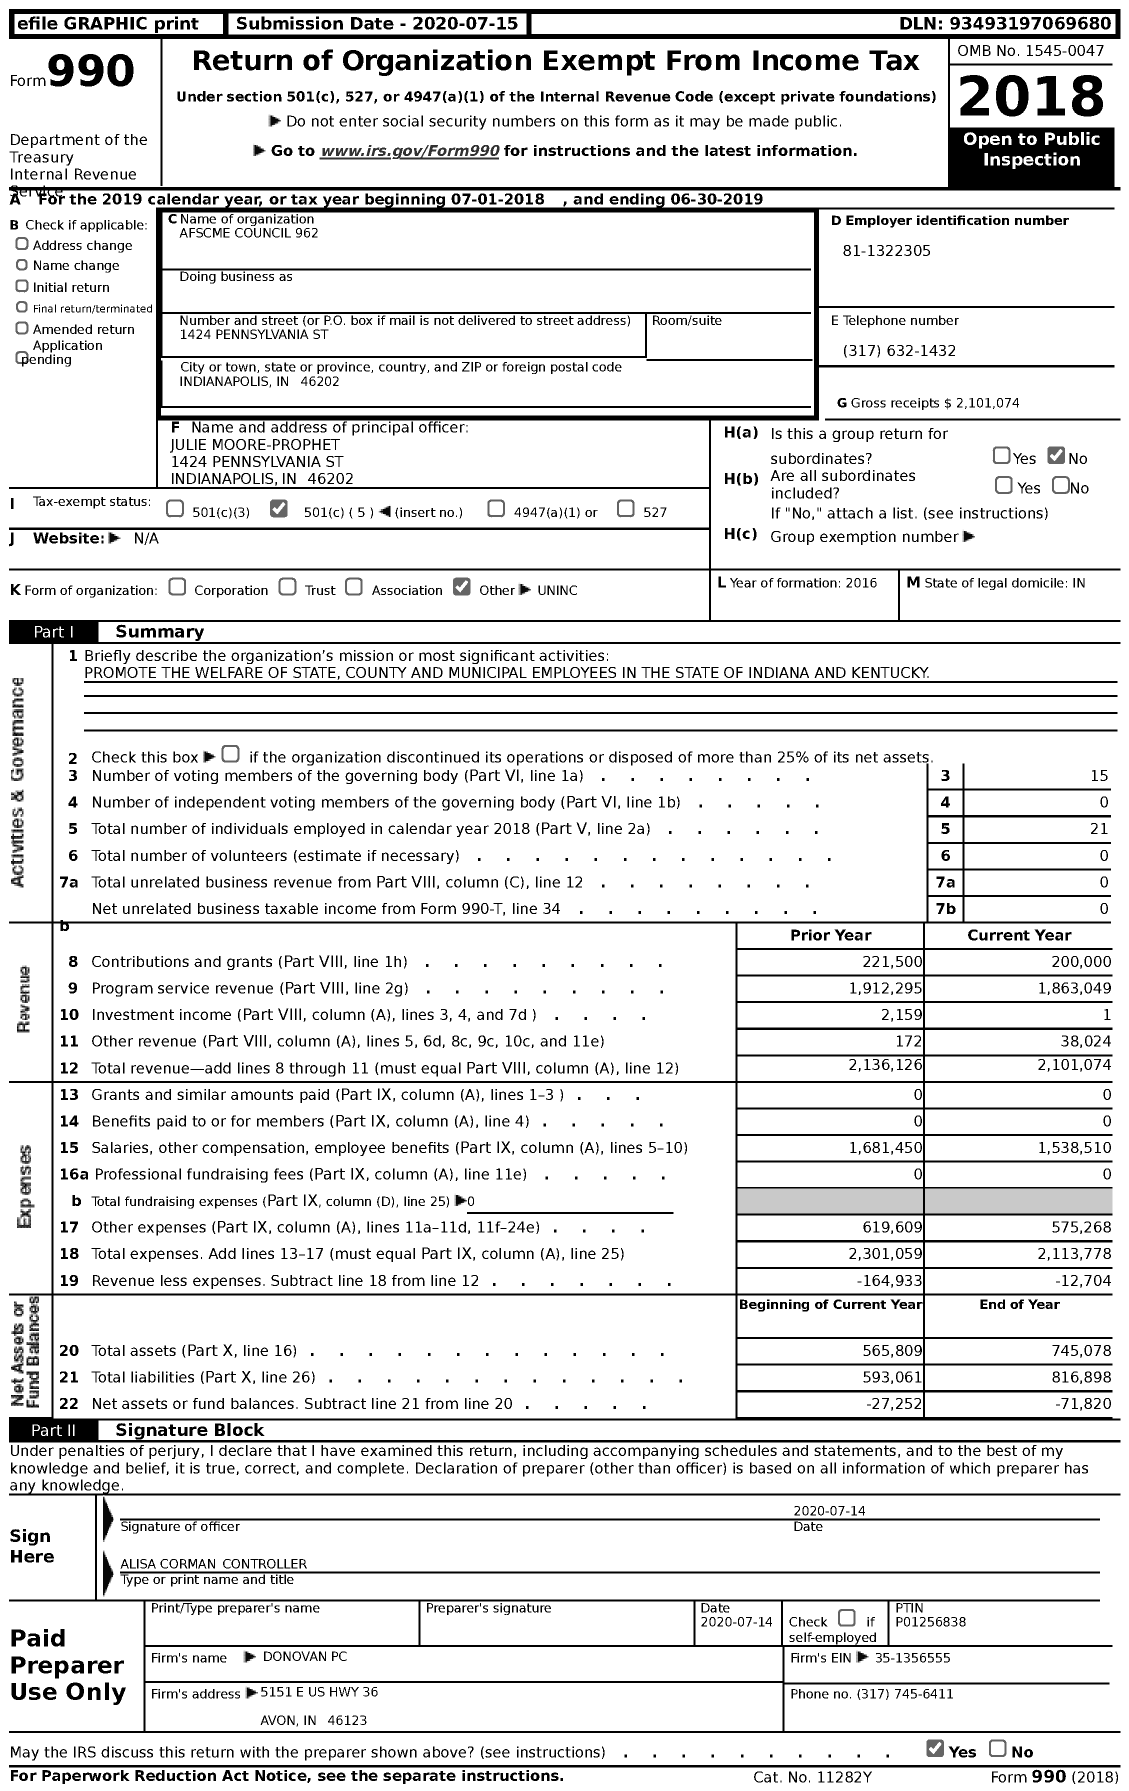 Image of first page of 2018 Form 990 for American Federation of State County & Municipal Employees - C0962in AFSCME Council 962